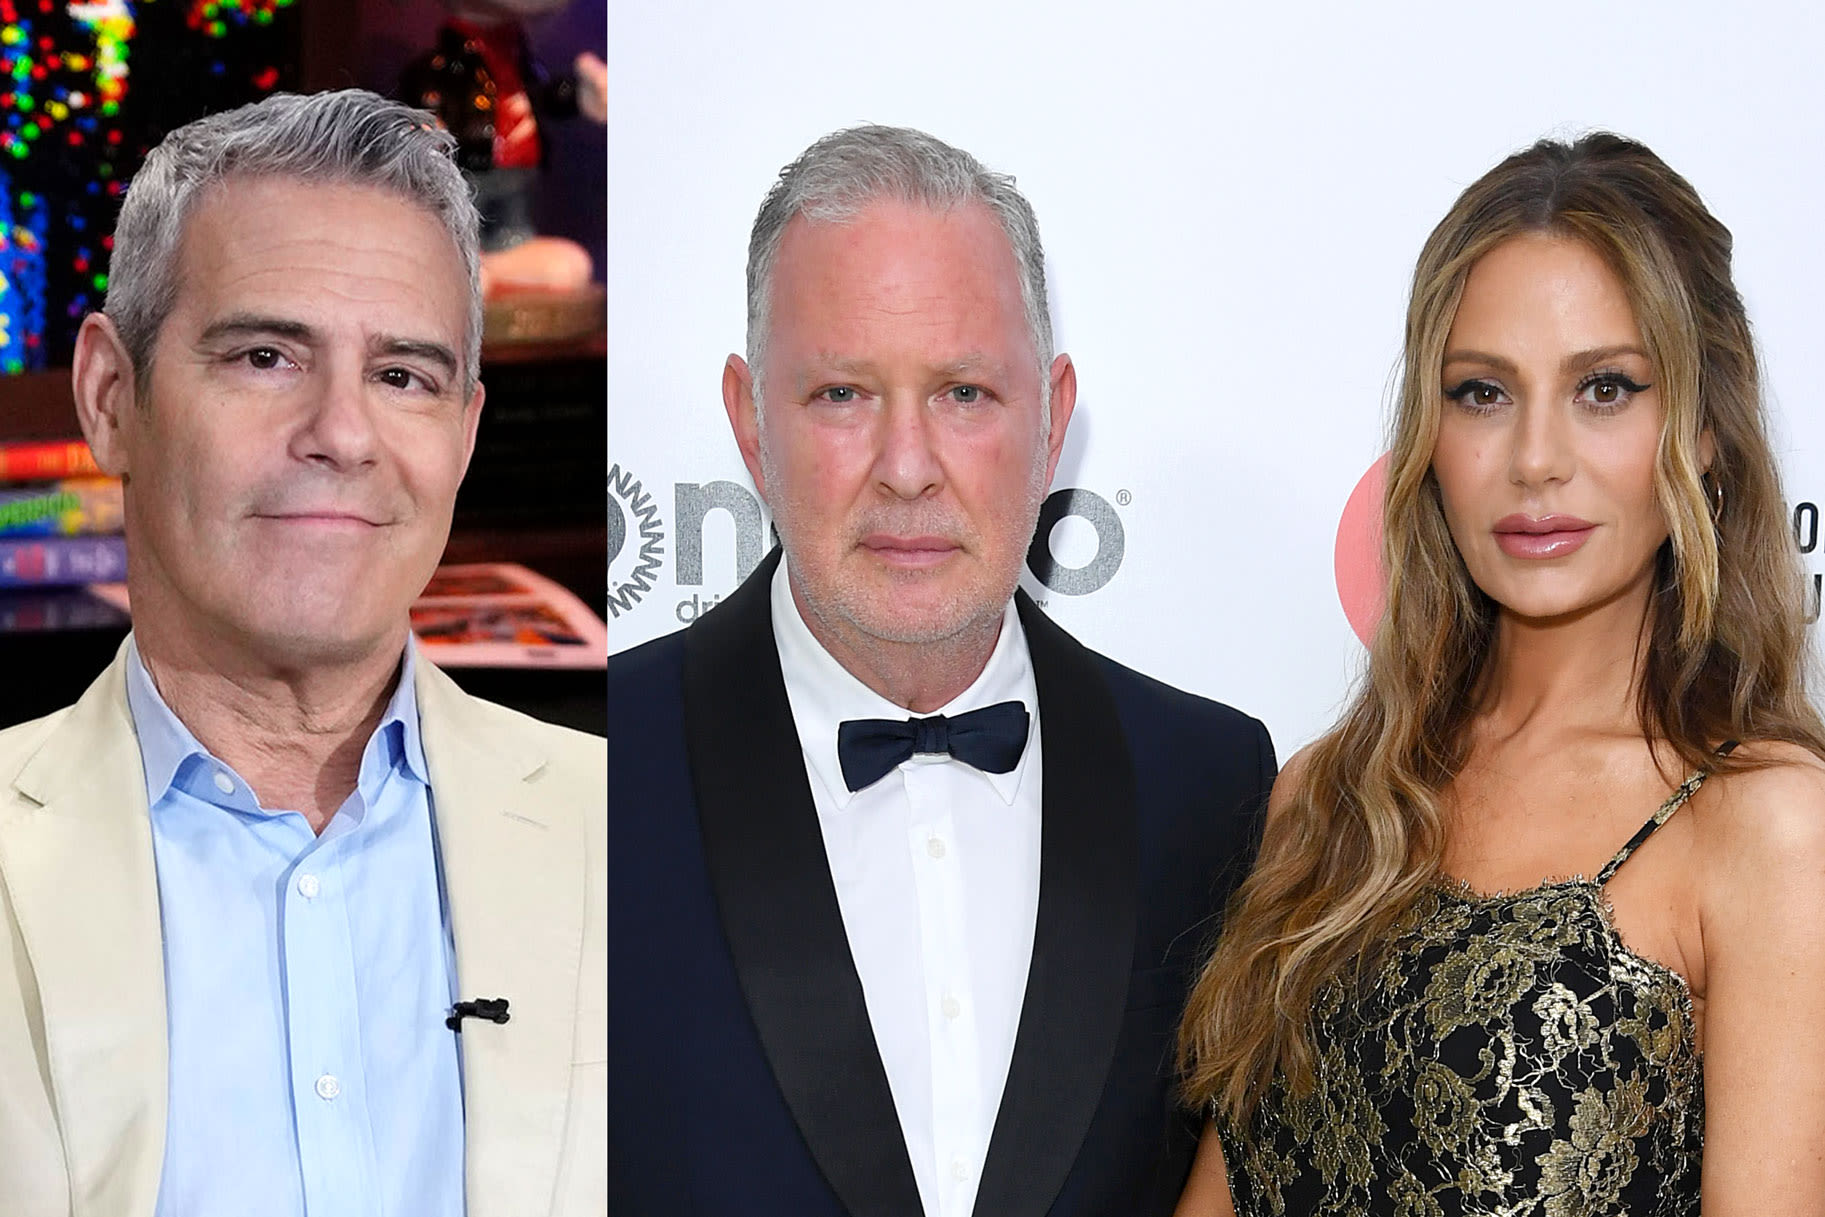 Andy Cohen Reacts to "Ridiculous" Rumors About Dorit and PK's Separation | Bravo TV Official Site